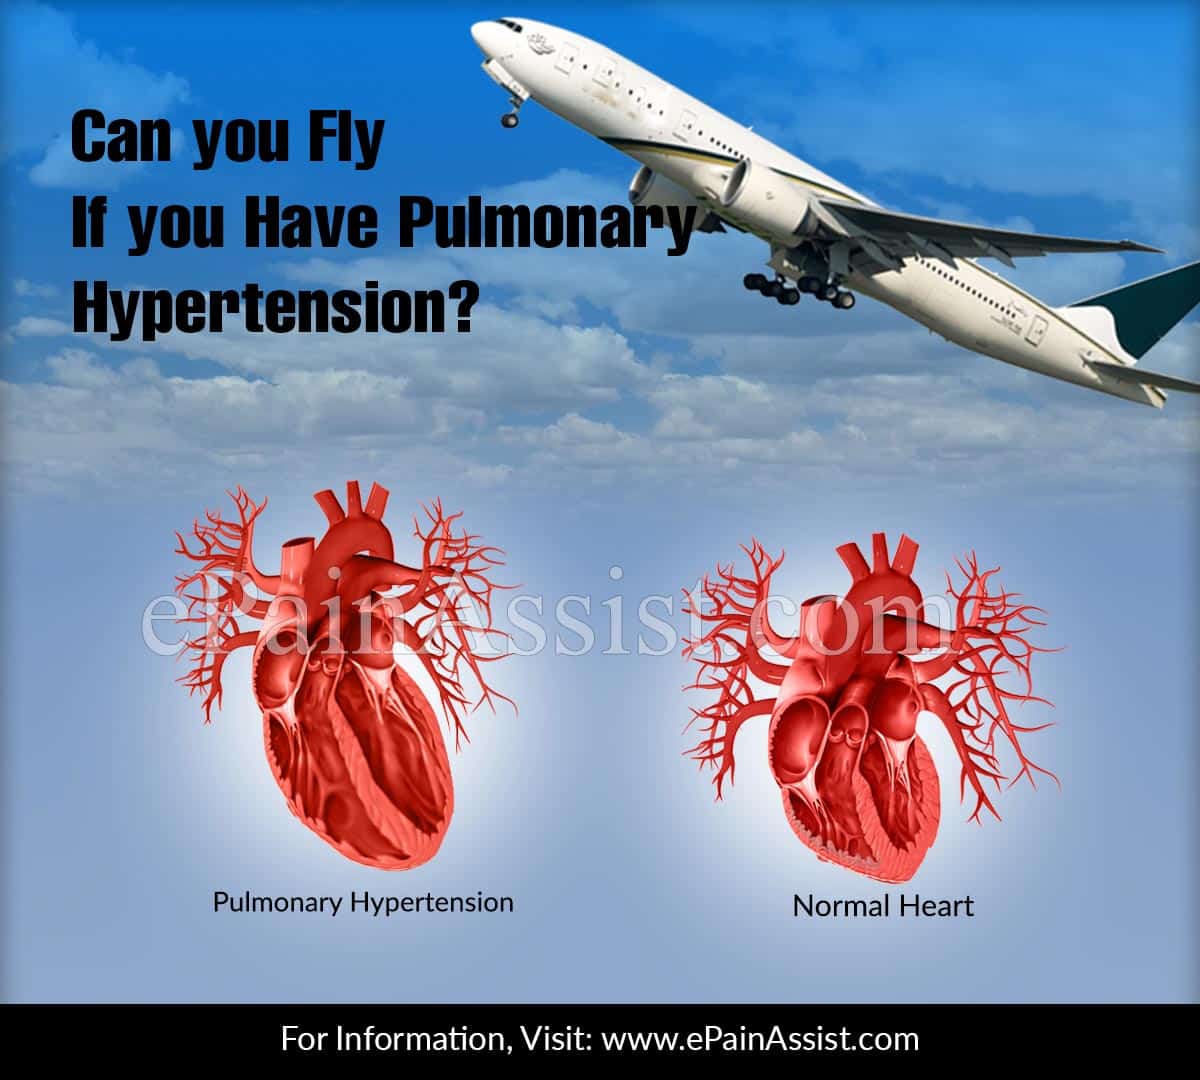 Can you Fly if you Have Pulmonary Hypertension?